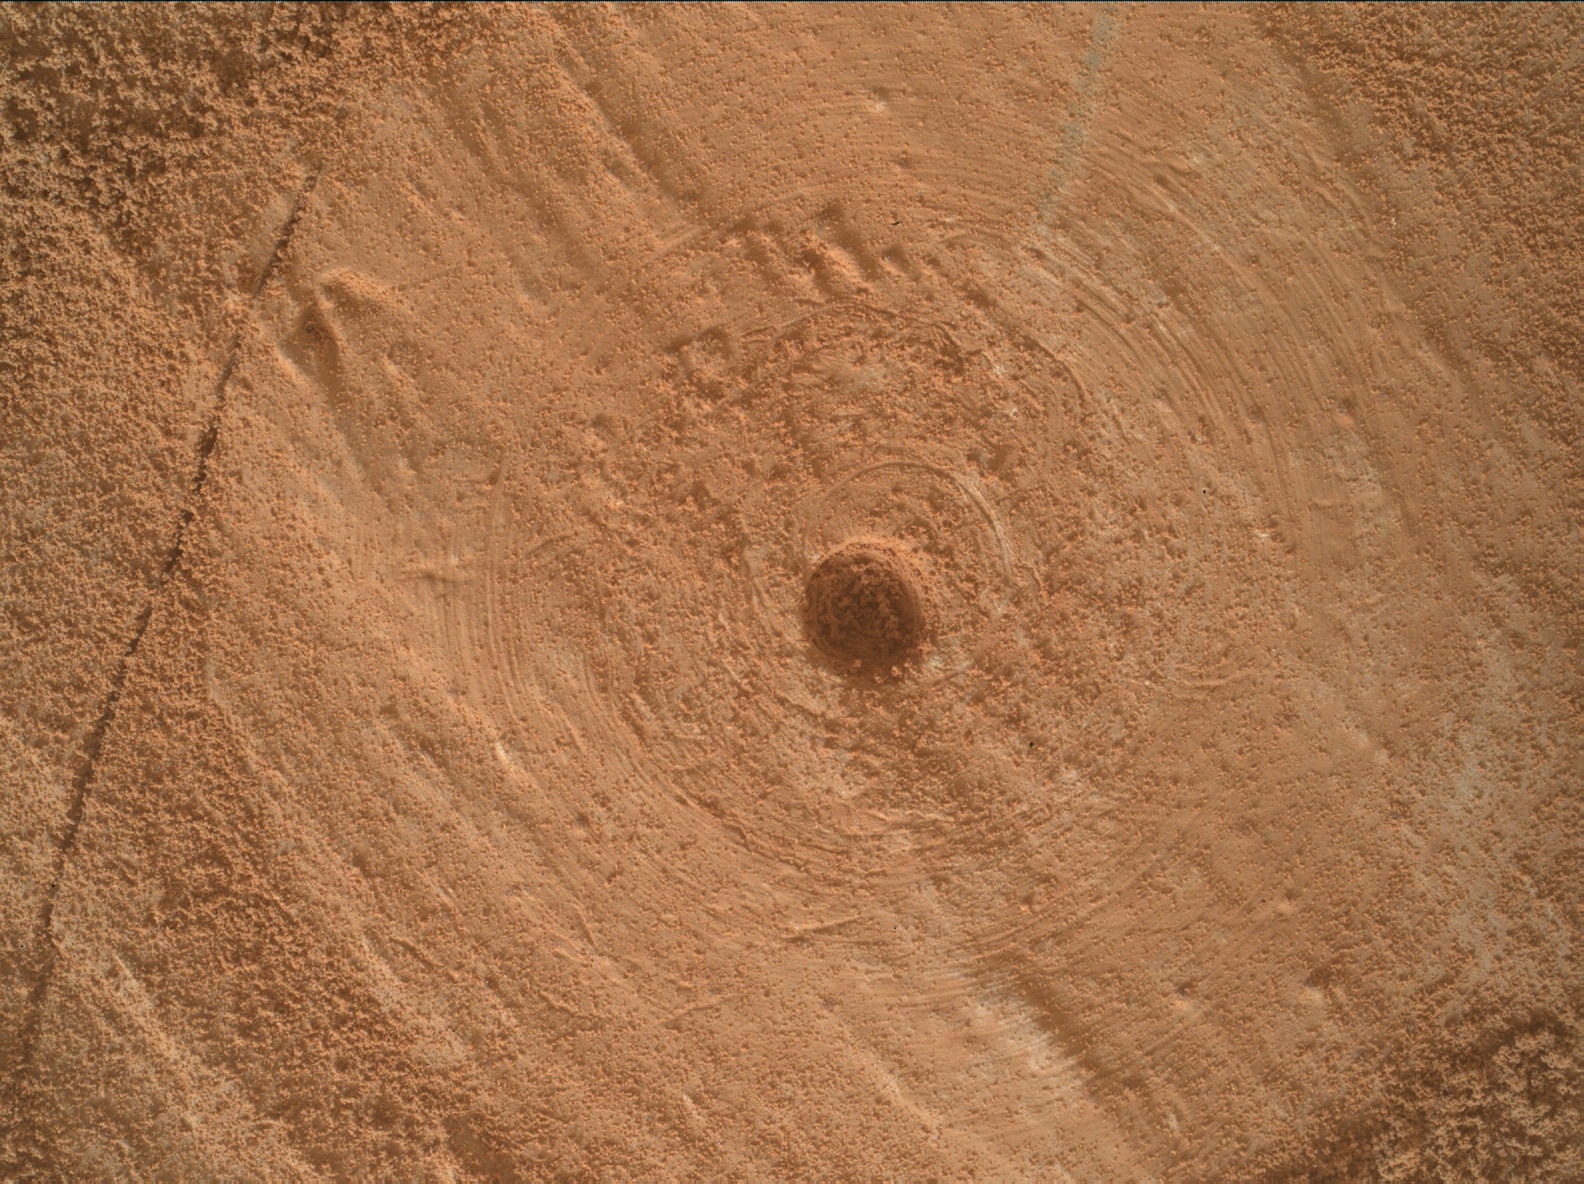 Nasa's Mars rover Curiosity acquired this image using its Mars Hand Lens Imager (MAHLI) on Sol 3491